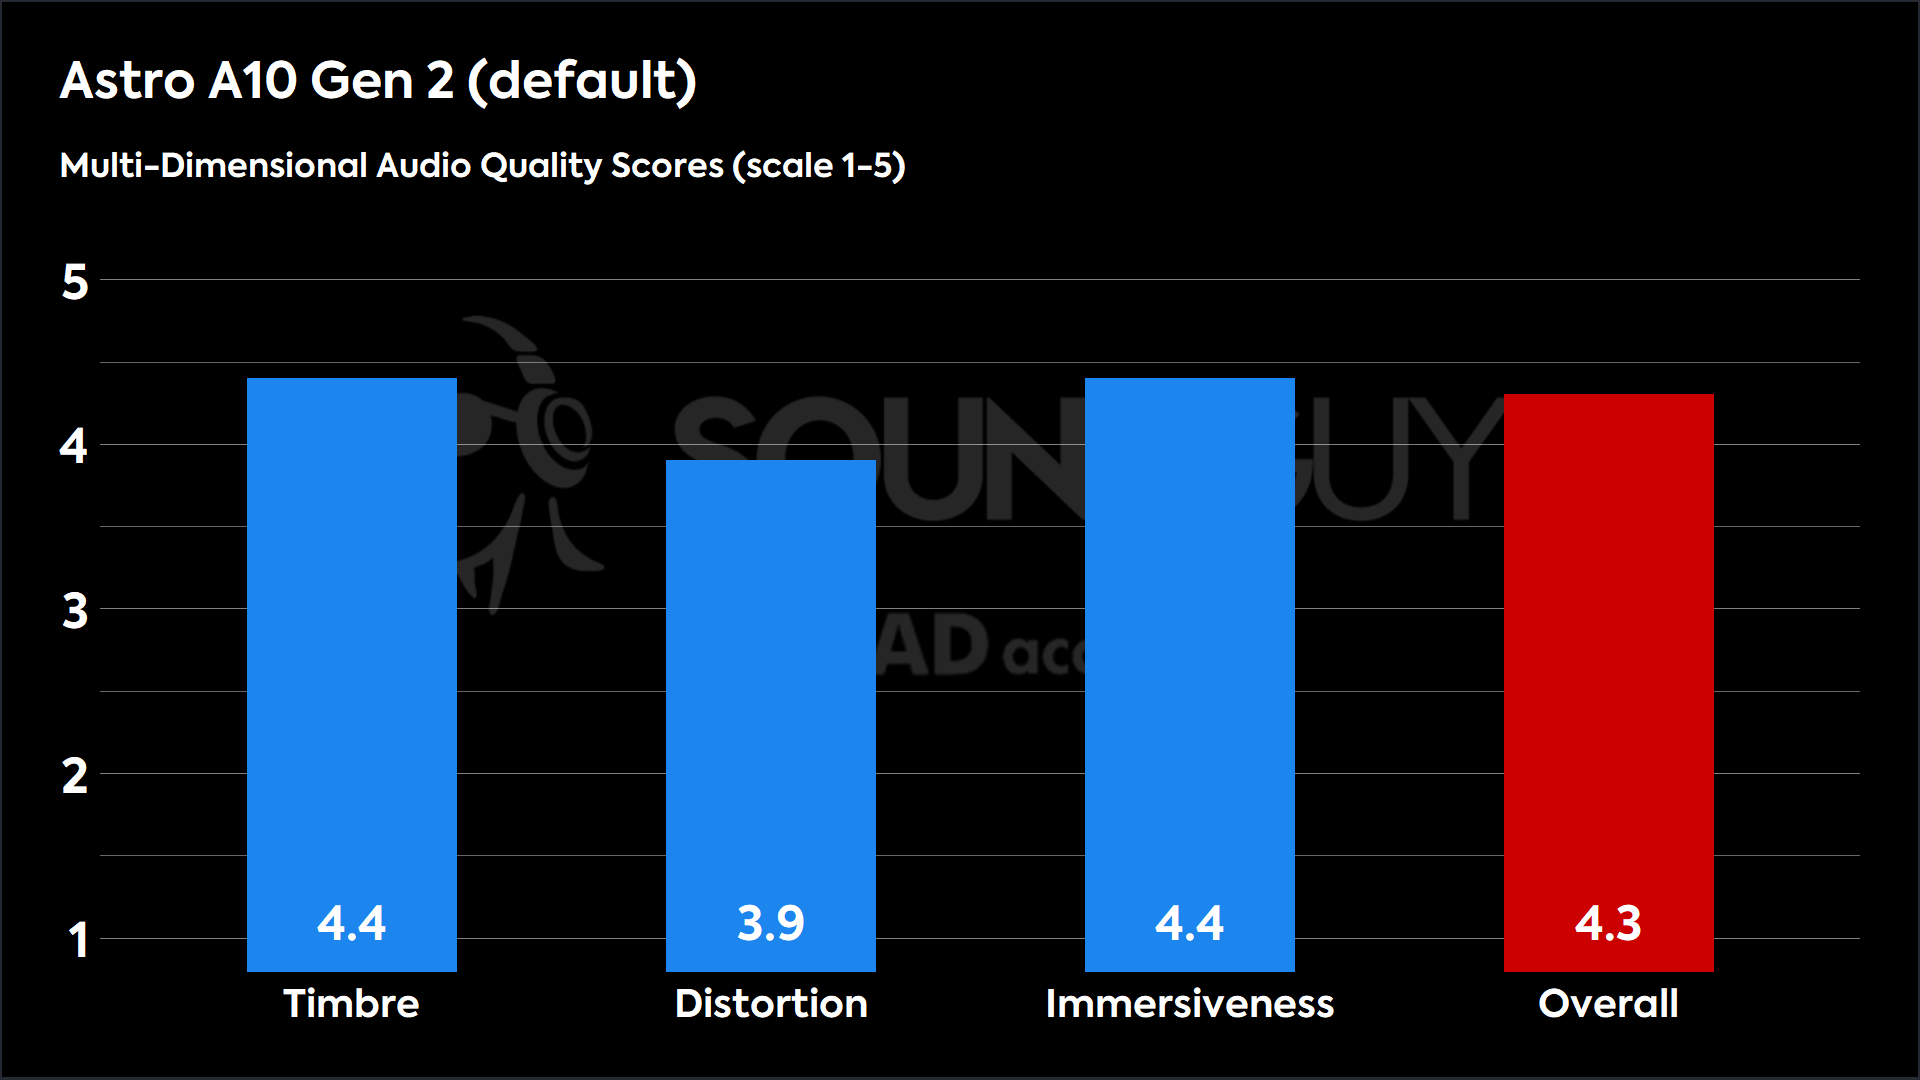 This chart shows the MDAQS results for the Astro A10 Gen 2 in default mode. The Timbre score is 4.4, The Distortion score is 3.9, the Immersiveness score is 4.4, and the Overall Score is 4.3).